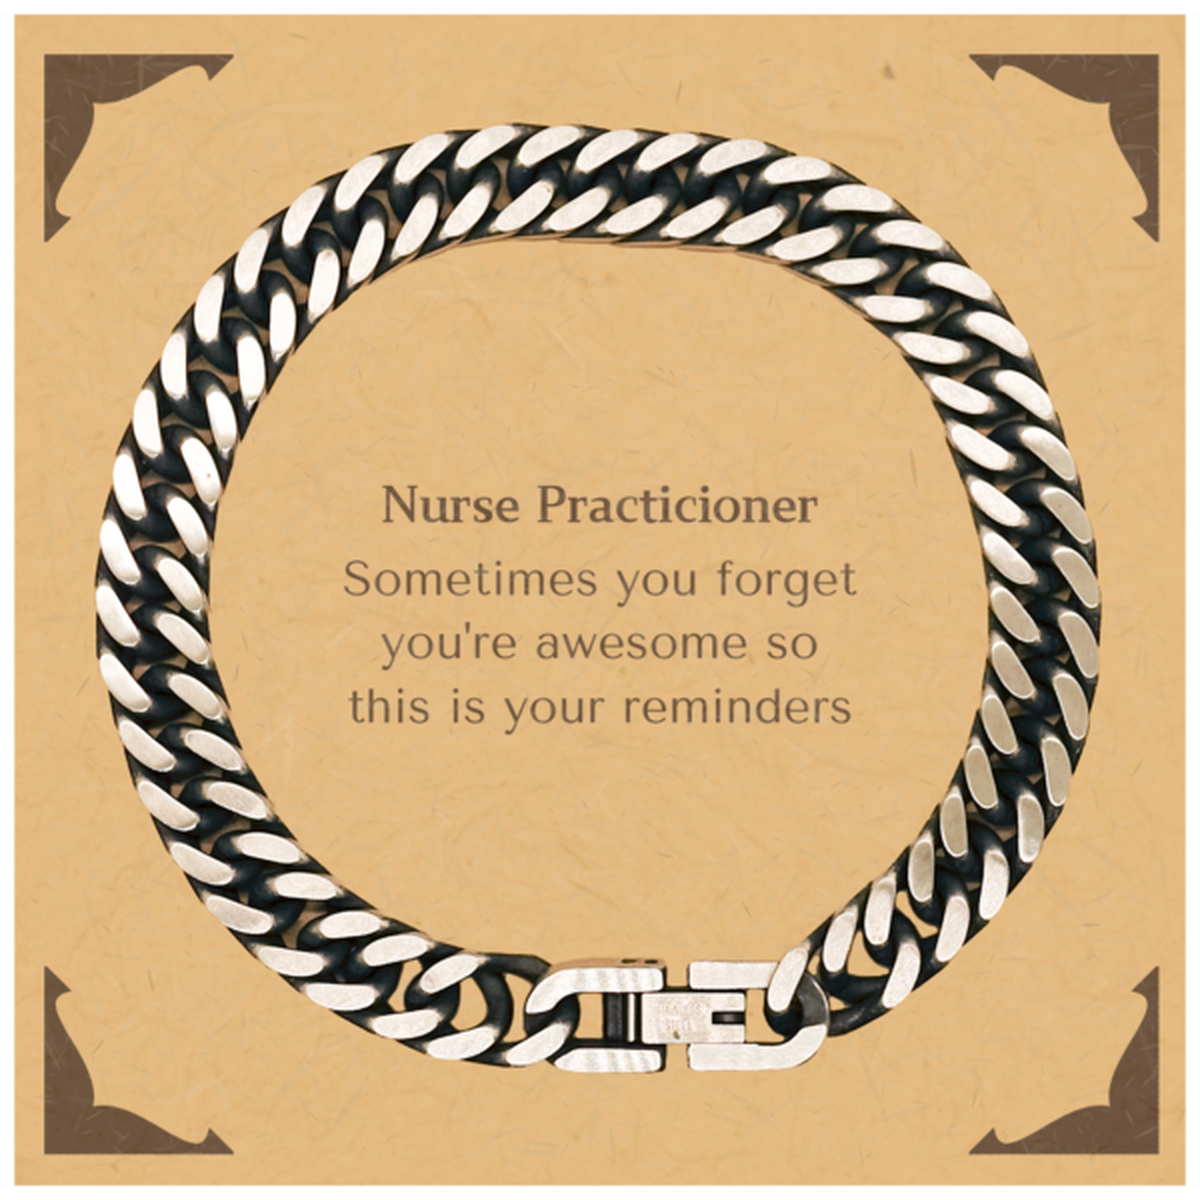 Sentimental Nurse Practicioner Cuban Link Chain Bracelet, Nurse Practicioner Sometimes you forget you're awesome so this is your reminders, Graduation Christmas Birthday Gifts for Nurse Practicioner, Men, Women, Coworkers